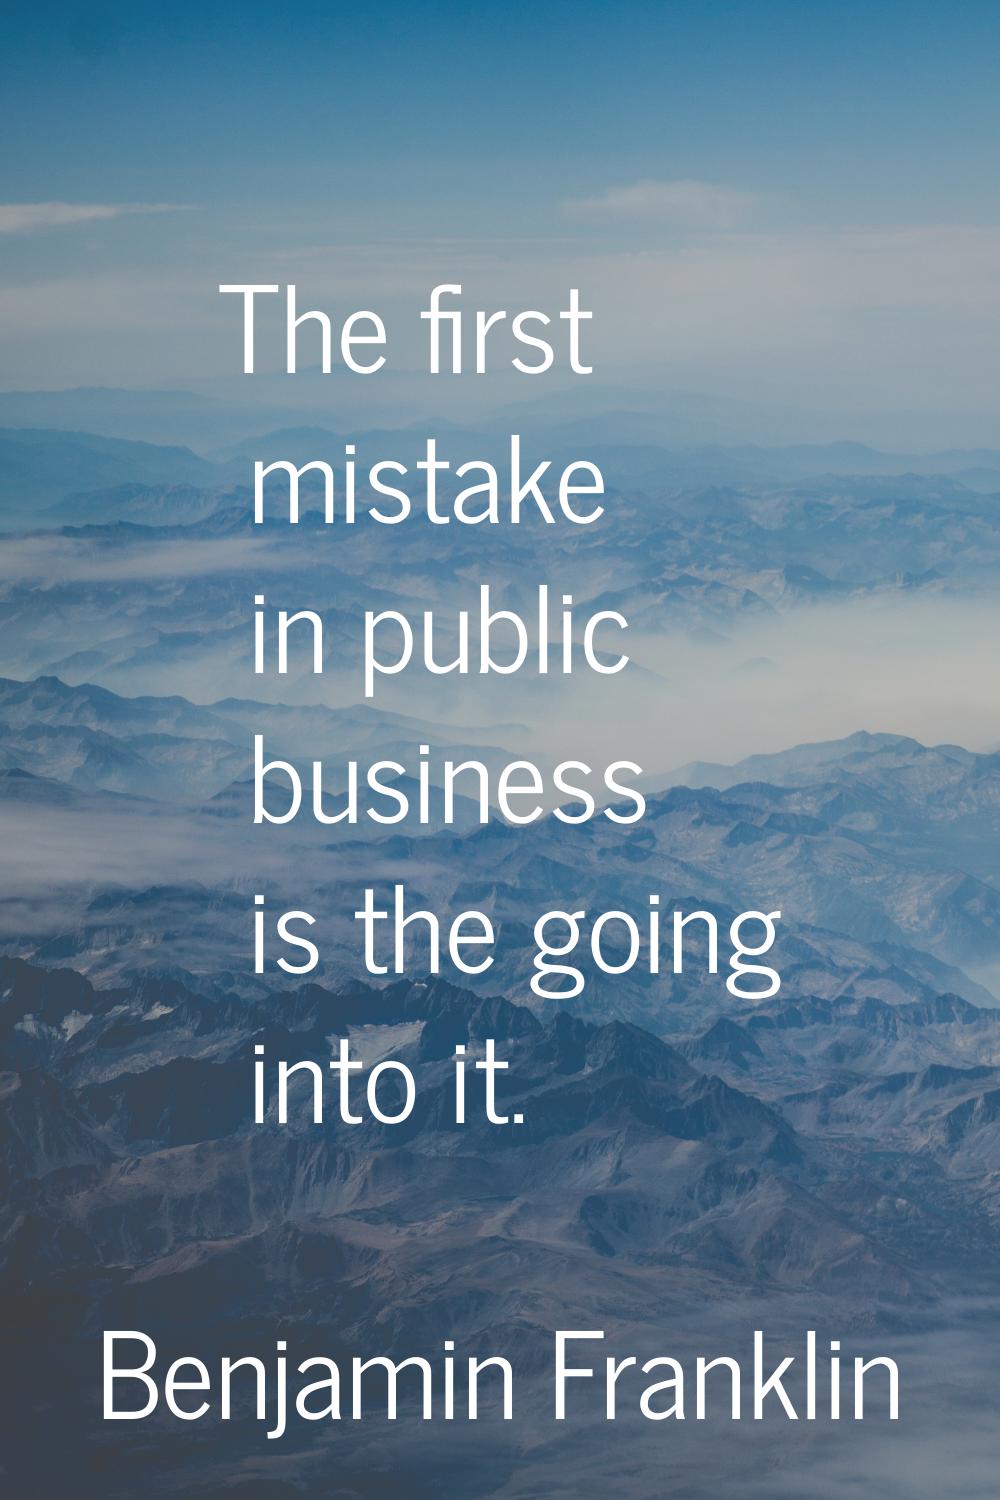 The first mistake in public business is the going into it.